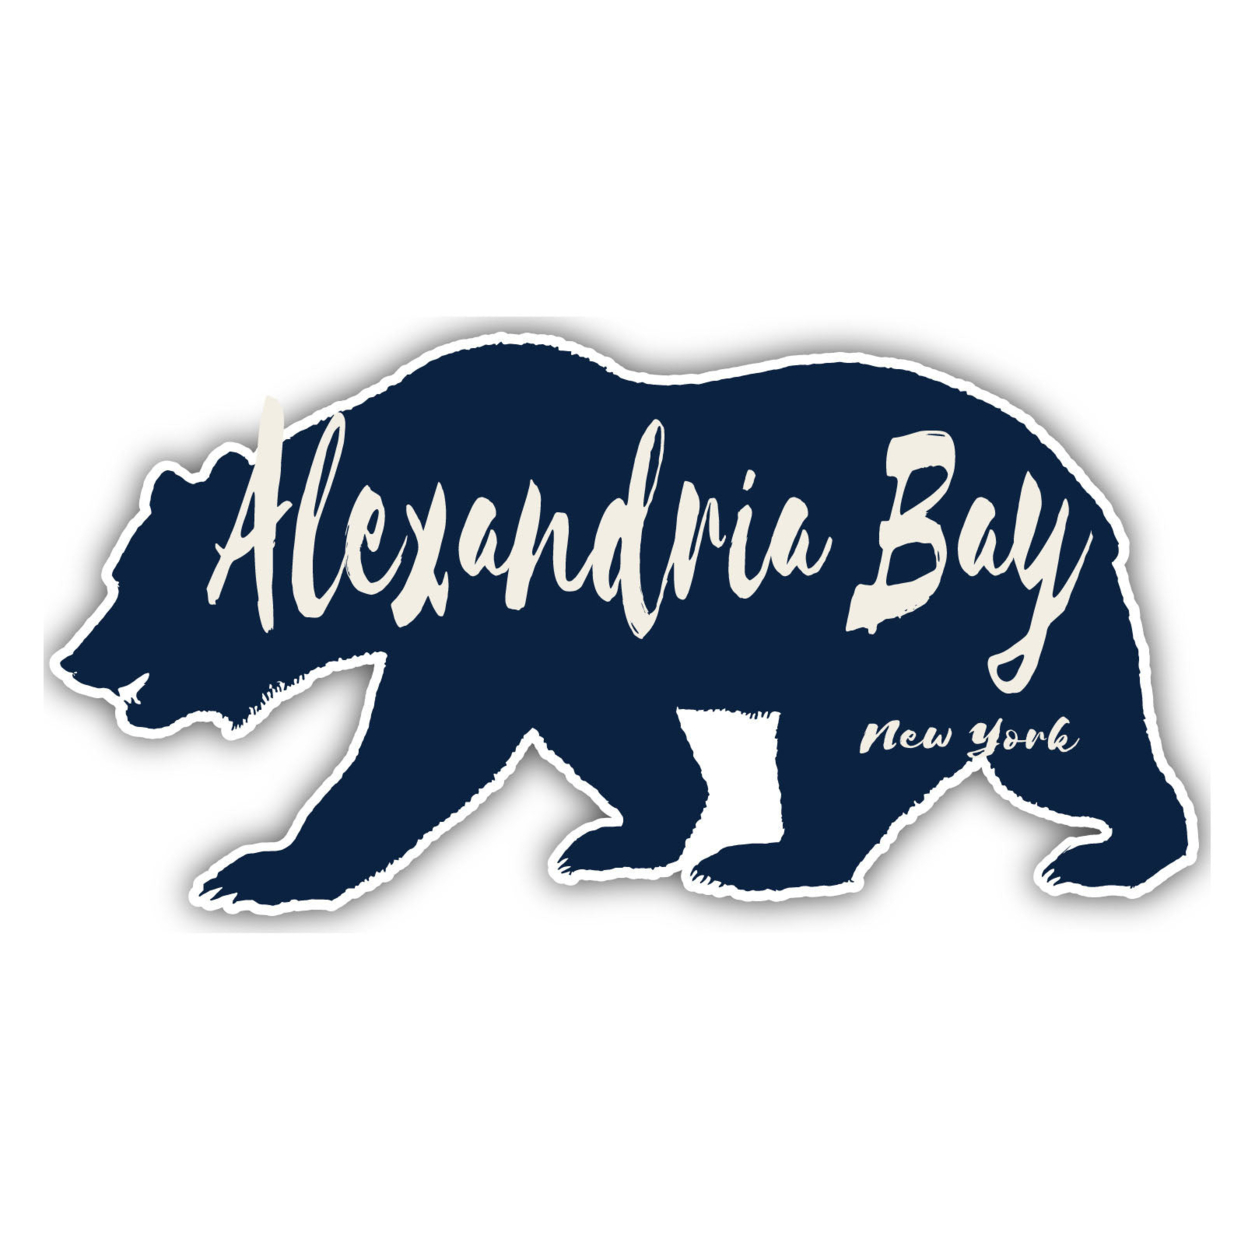 Alexandria Bay New York Souvenir Decorative Stickers (Choose Theme And Size) - 4-Pack, 4-Inch, Adventures Awaits